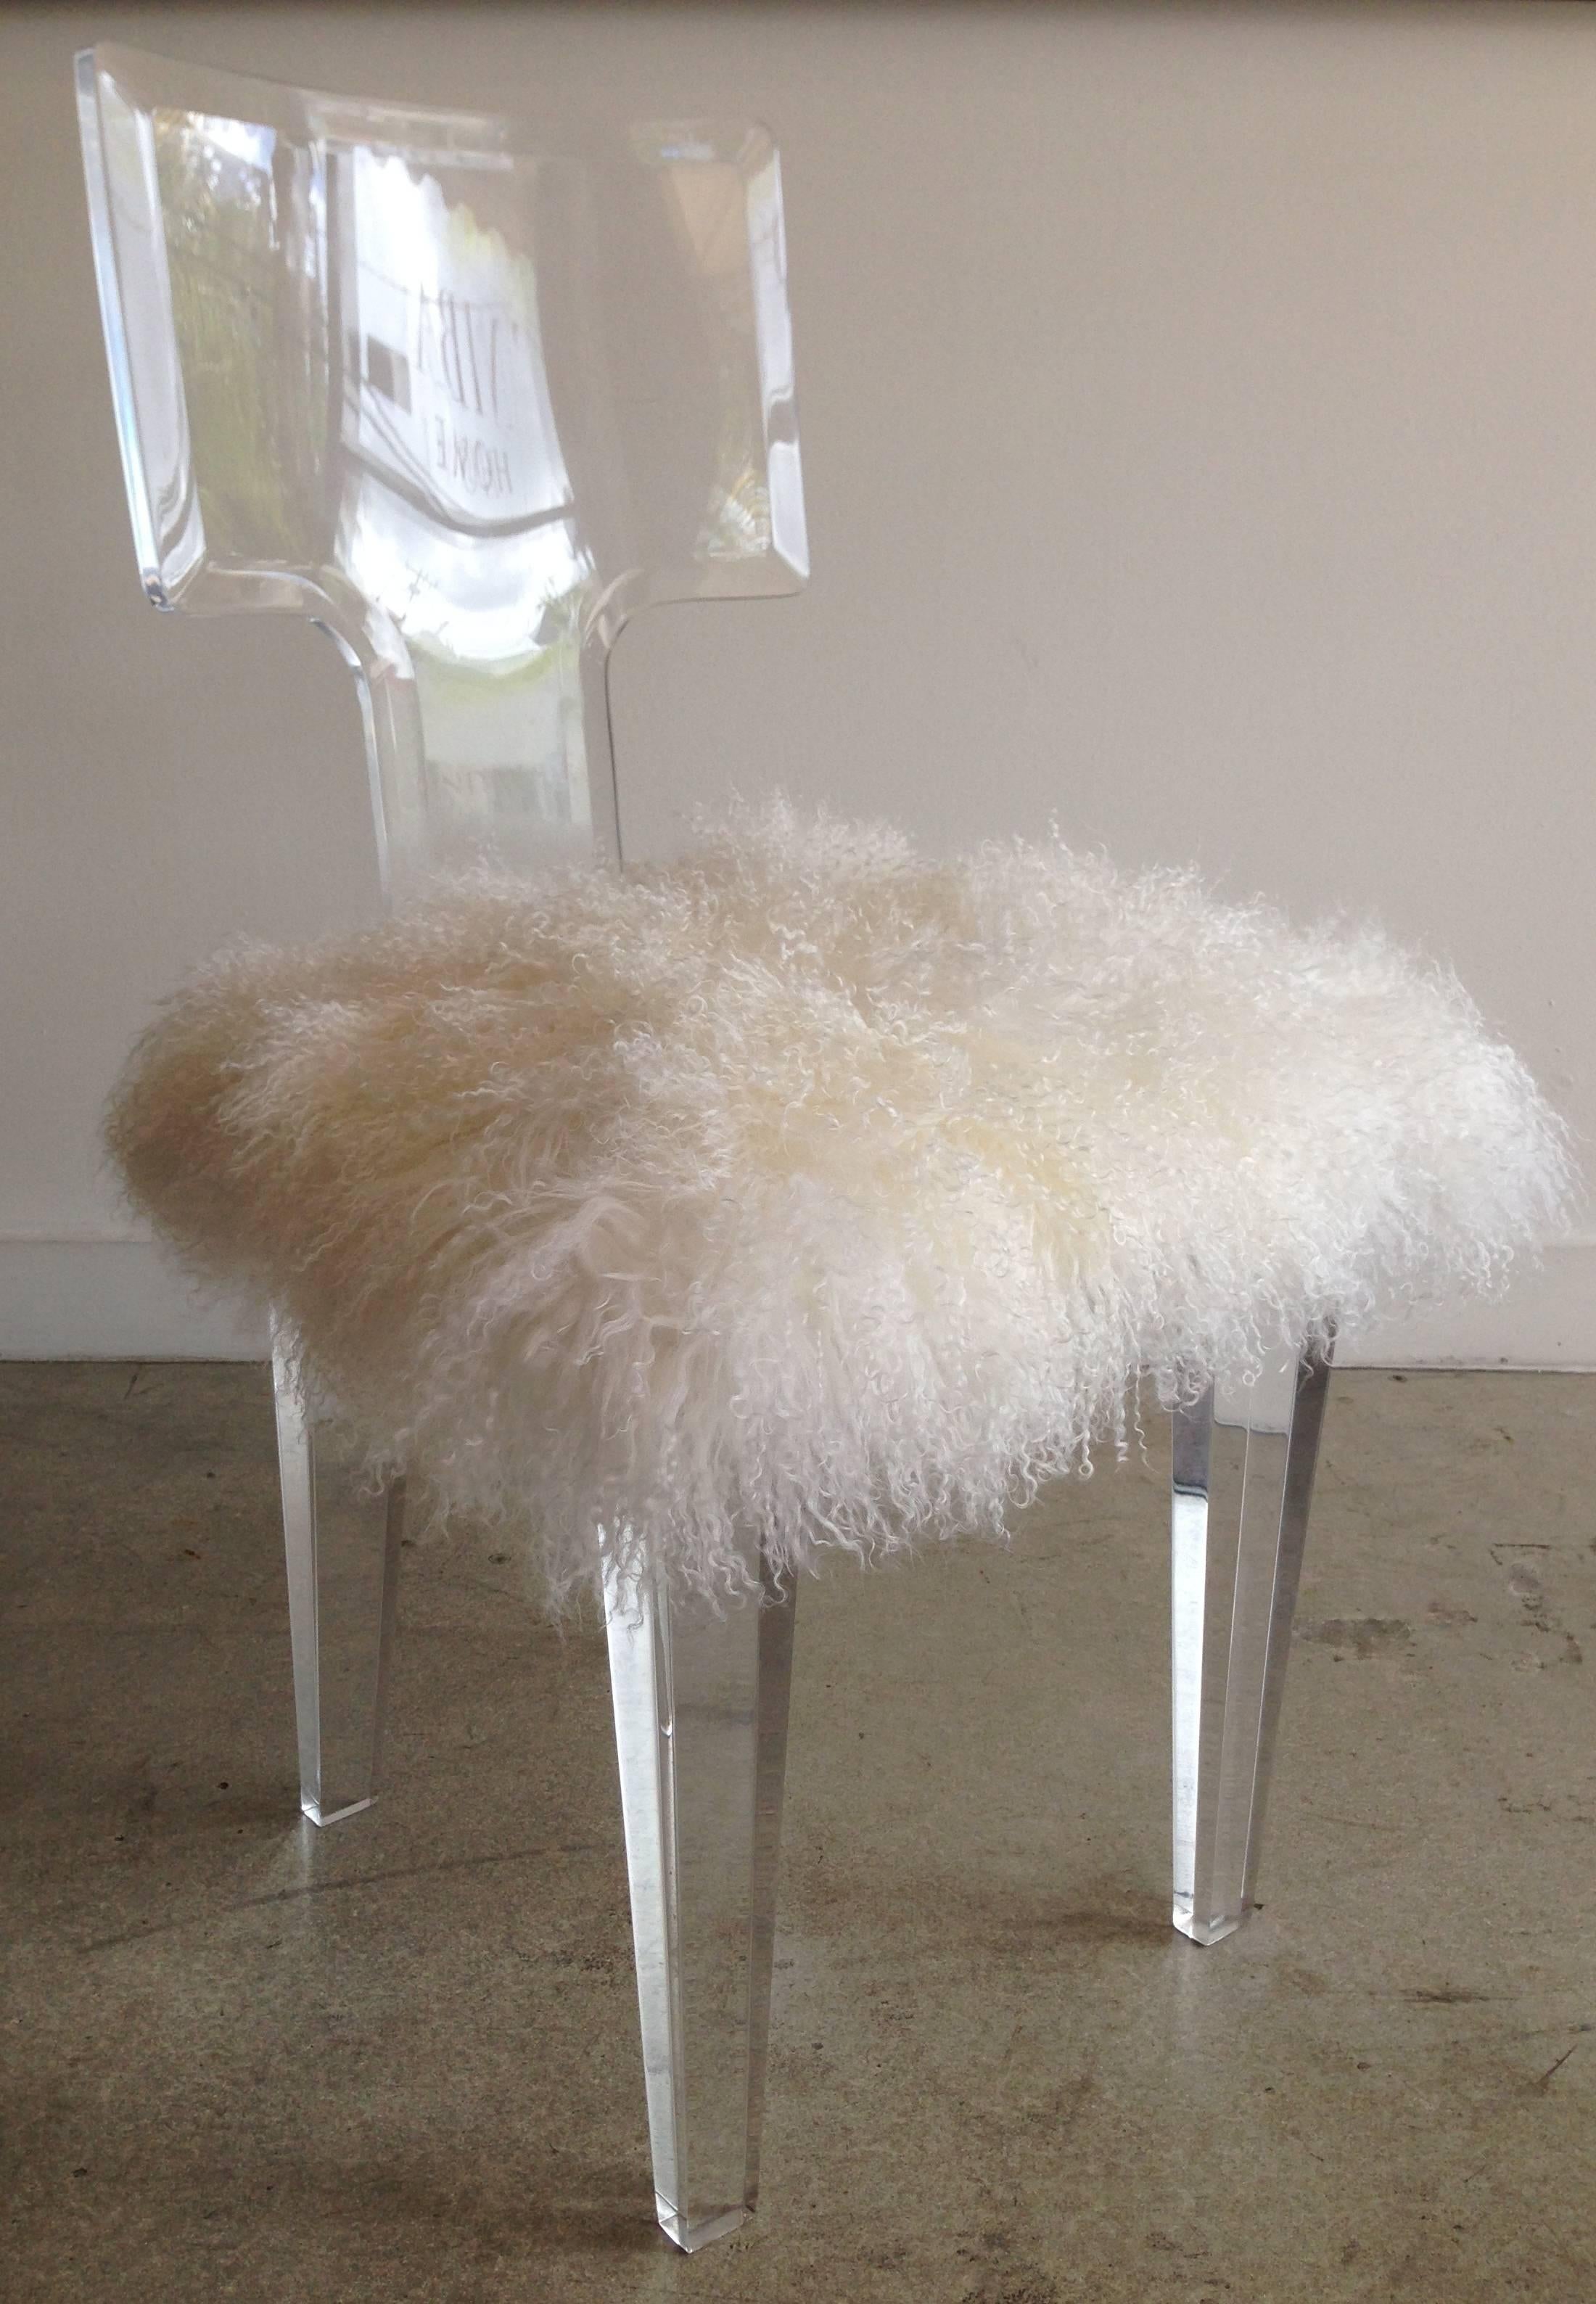 Clear Lucite chair with tapered legs, upholstered seat in white Mongolian lamb.  

Also available COM, requires 1/2 yard plain fabric, $1225.